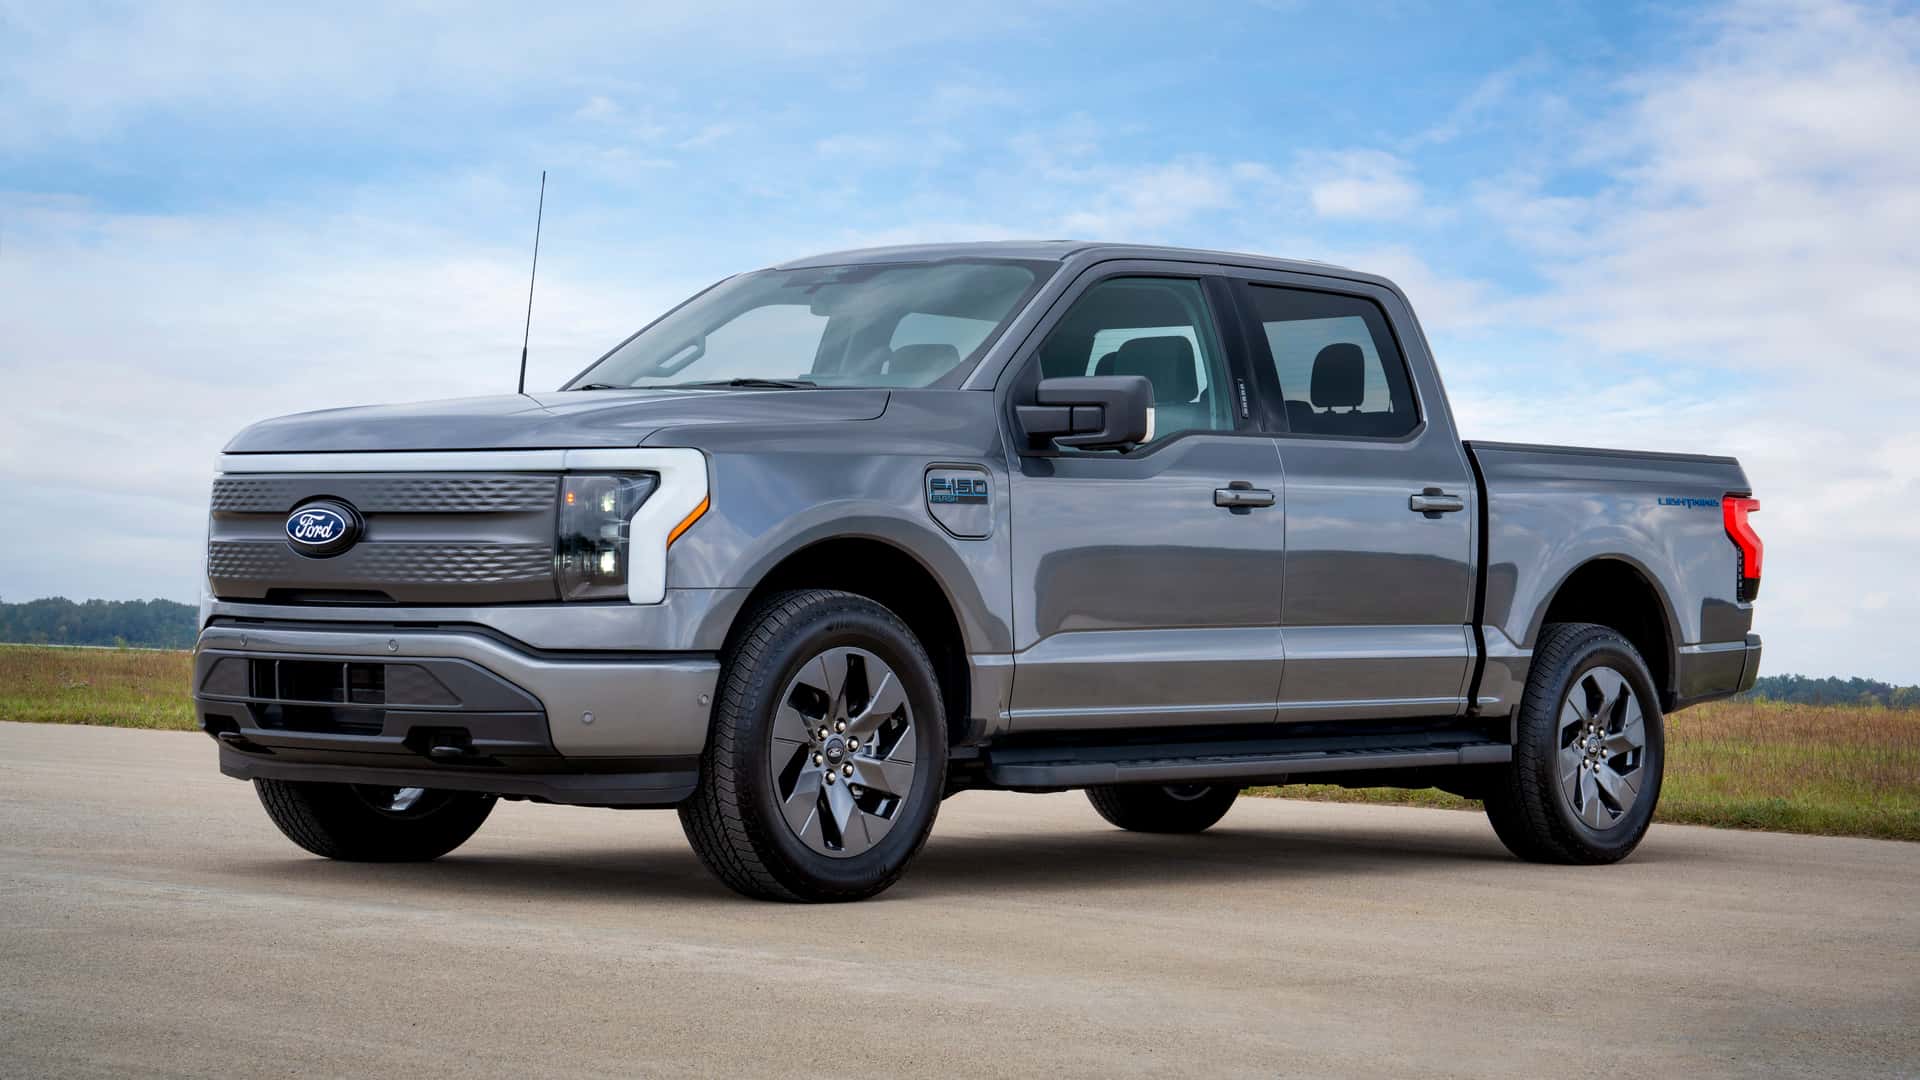 all 2024 ford f-150 lightnings come with a heat pump. here's why that's a big deal